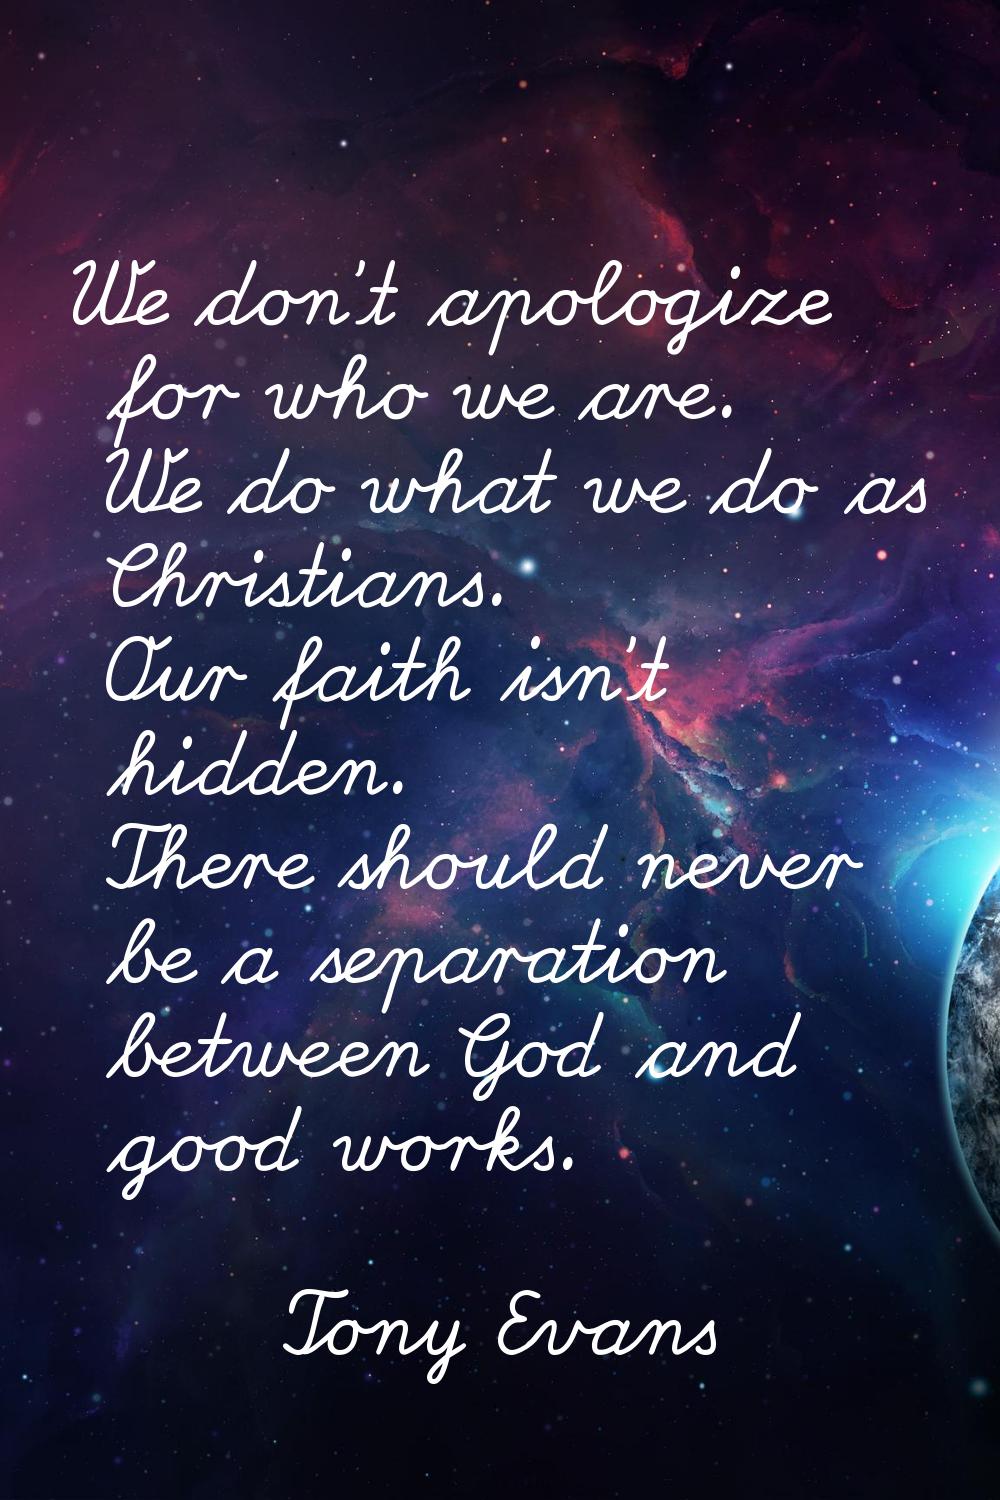 We don't apologize for who we are. We do what we do as Christians. Our faith isn't hidden. There sh